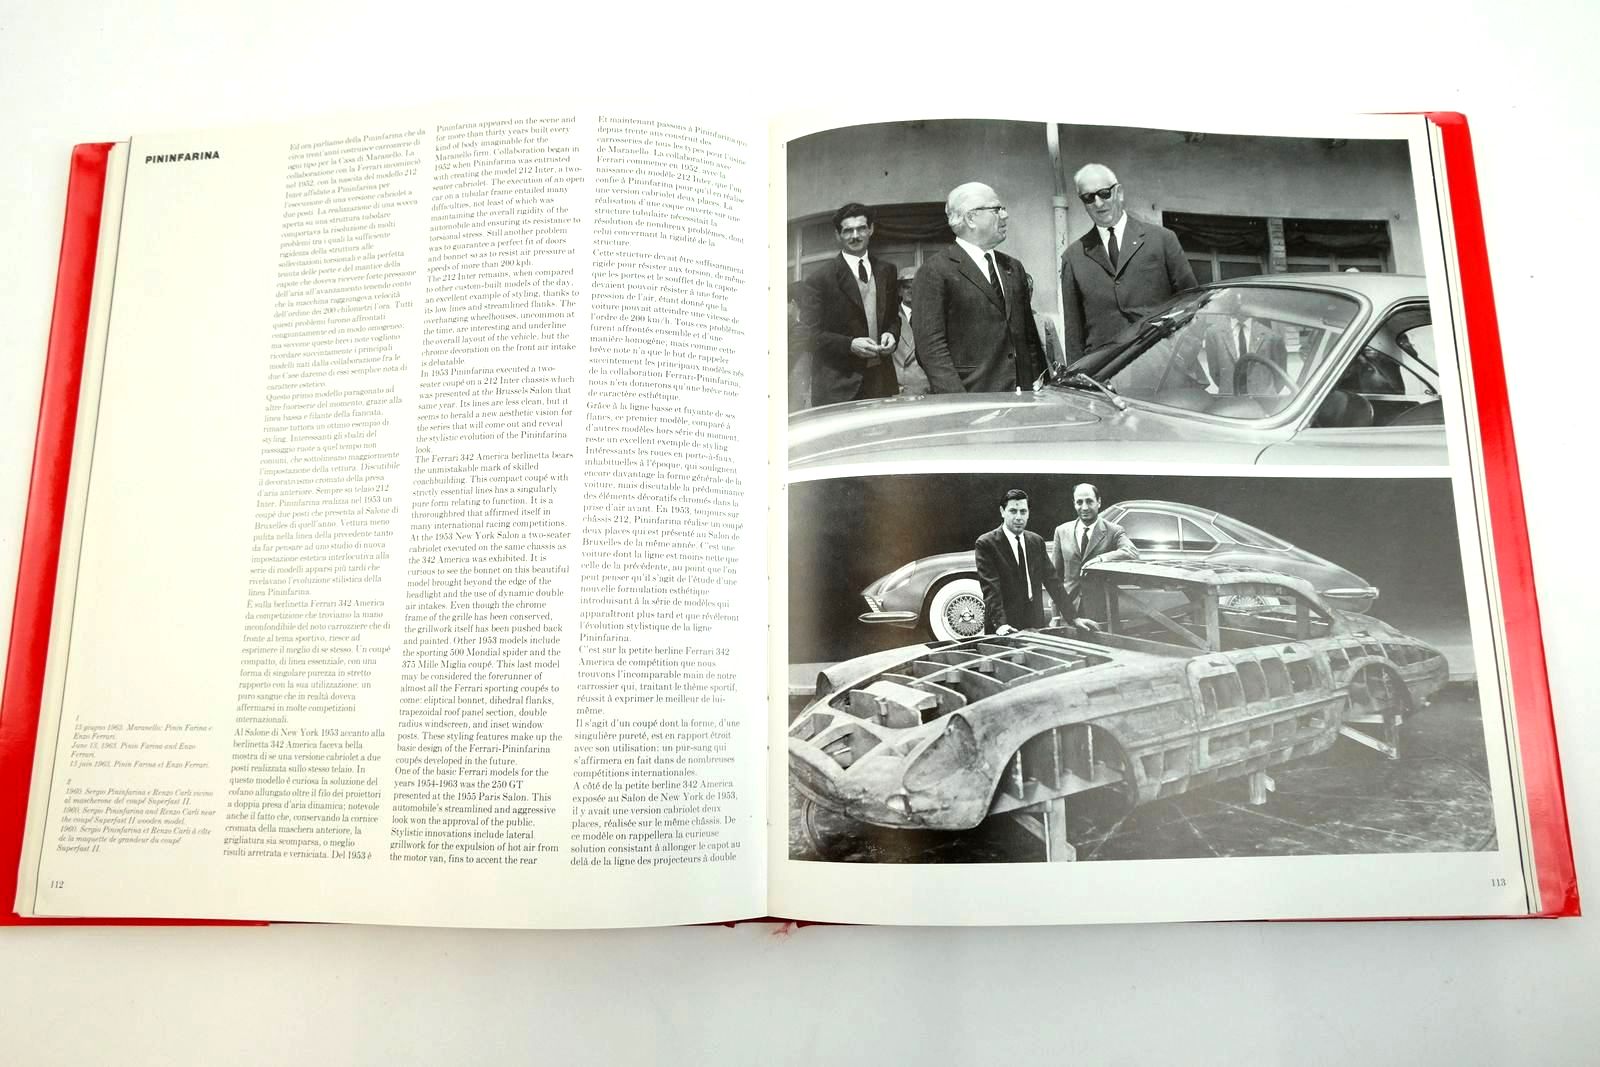 Photo of FERRARI CATALOGUE RAISONNE 1946-81 VOLUME 1 written by Costantino, Augusto published by Automobilia (STOCK CODE: 2135418)  for sale by Stella & Rose's Books